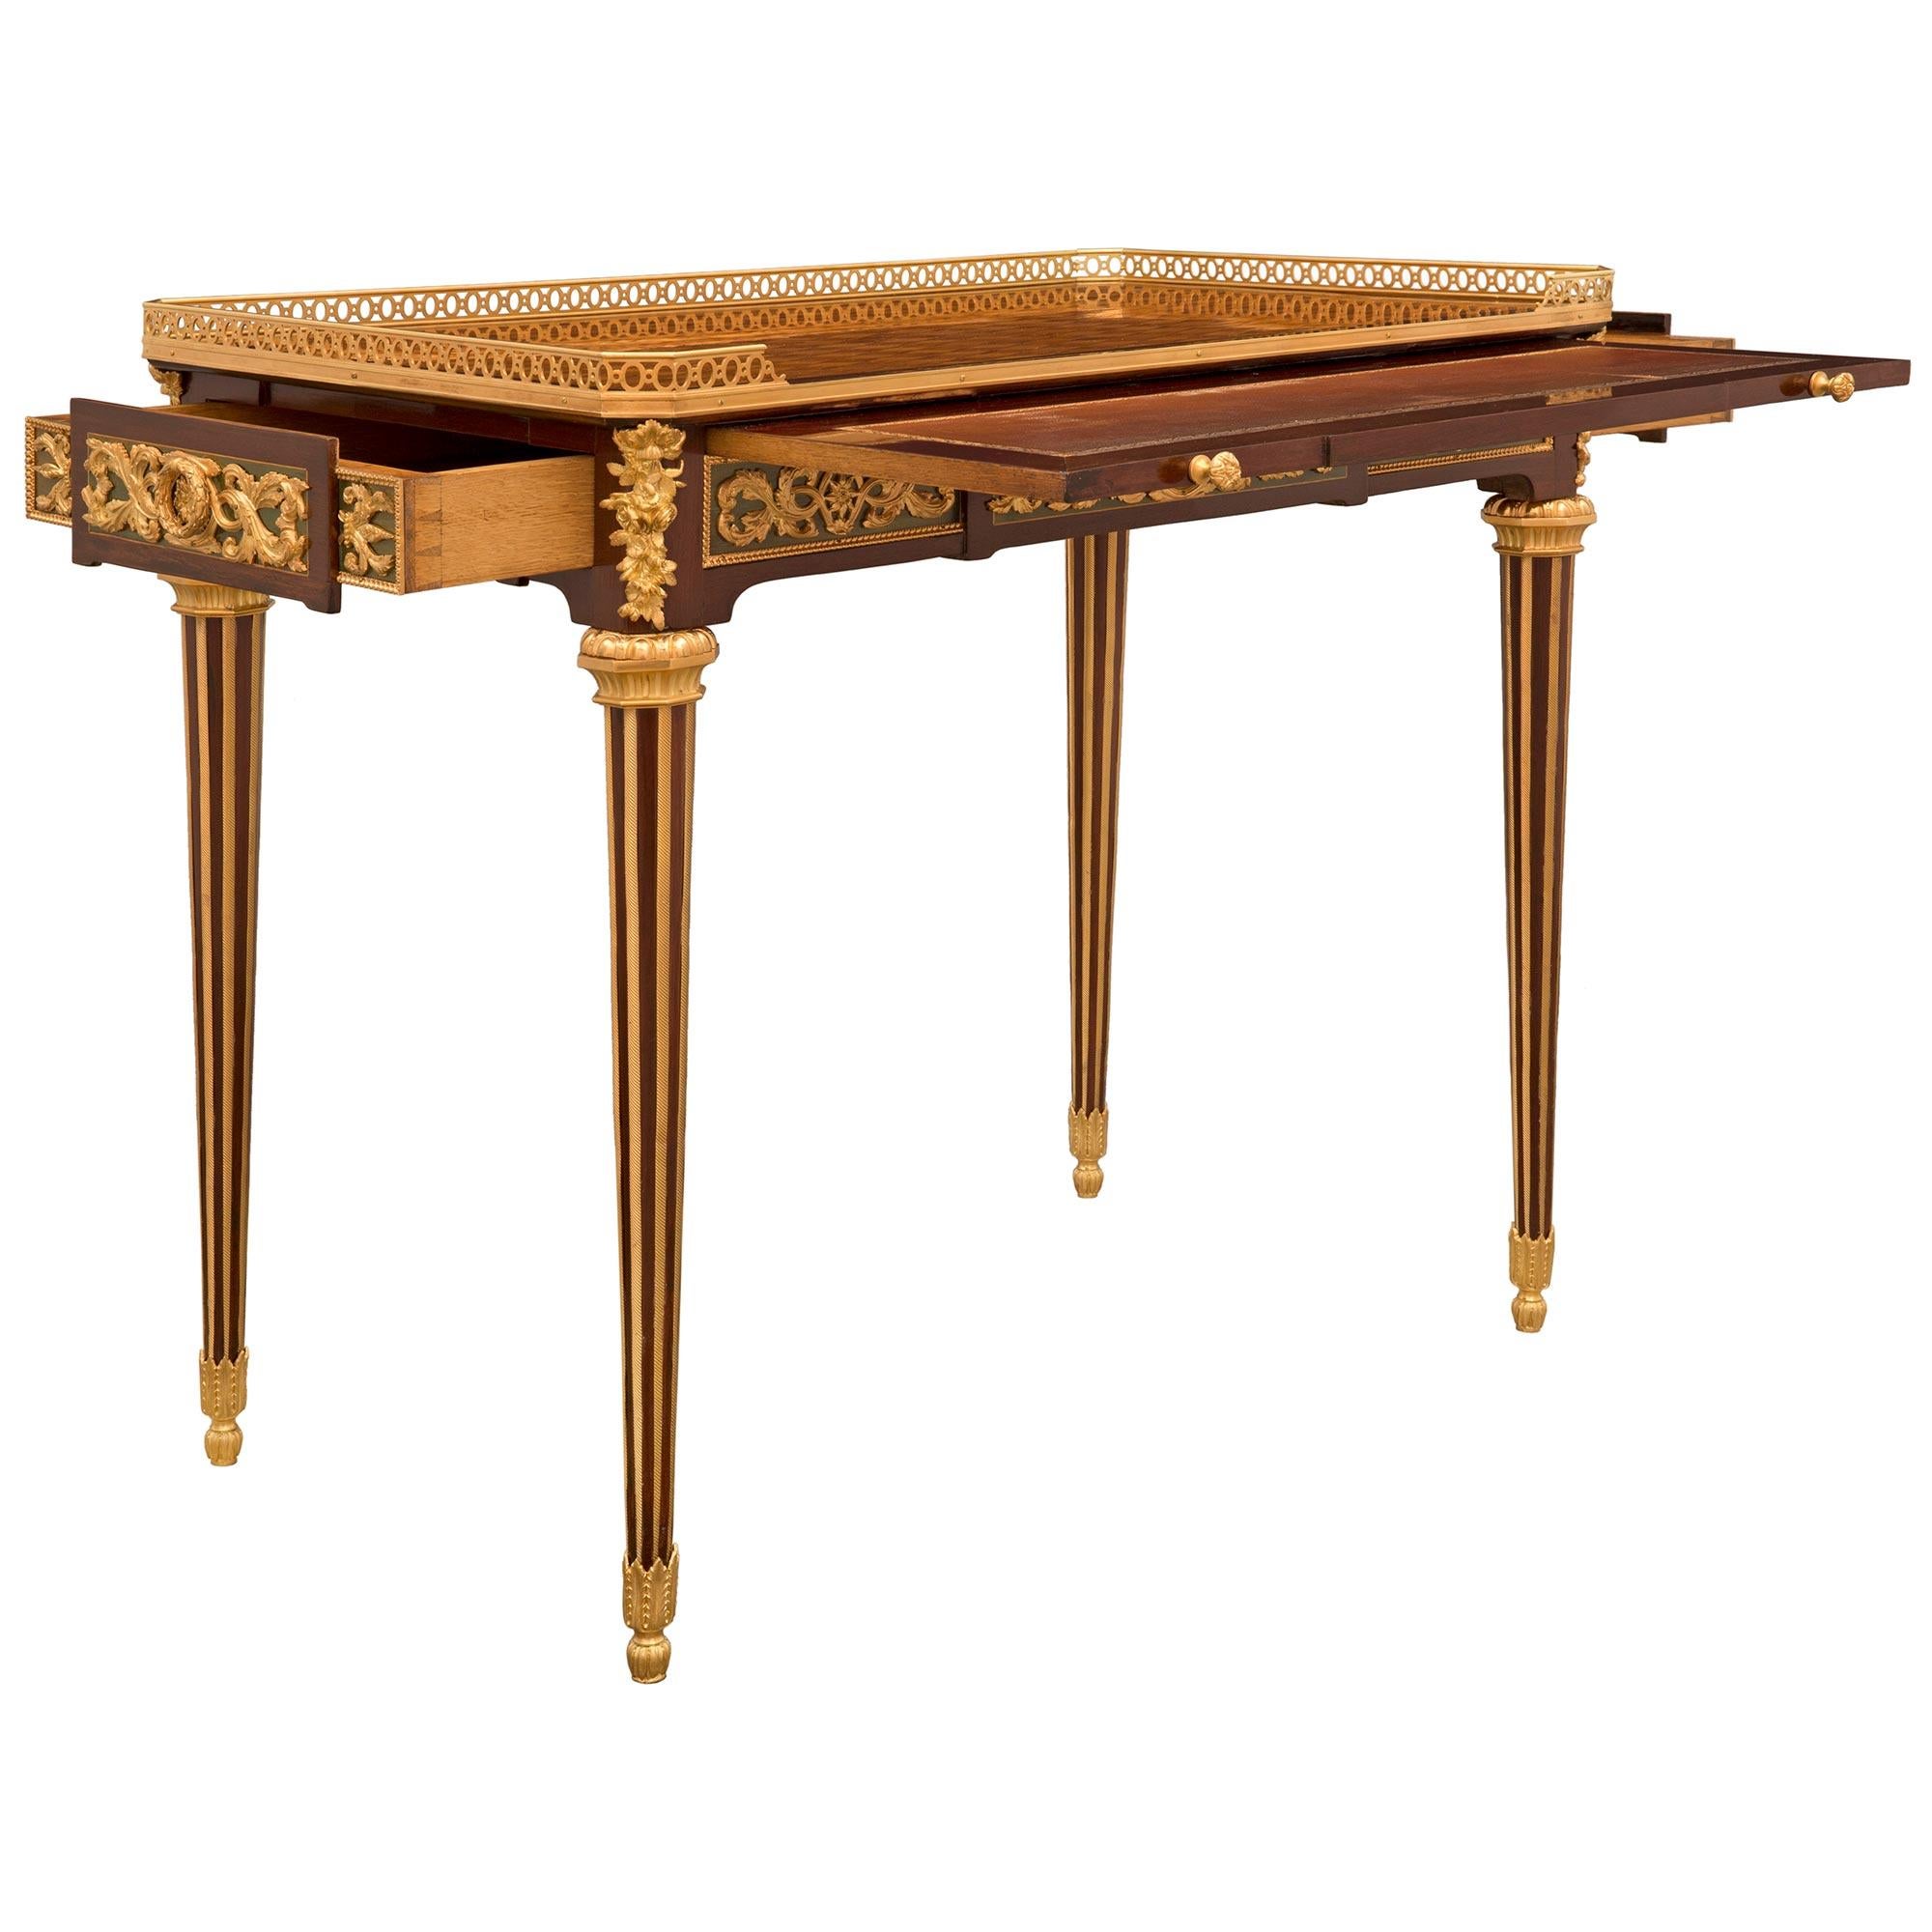 Ormolu French 19th Century Louis XVI Style Mahogany Side Table, Attributed to T. Millet For Sale